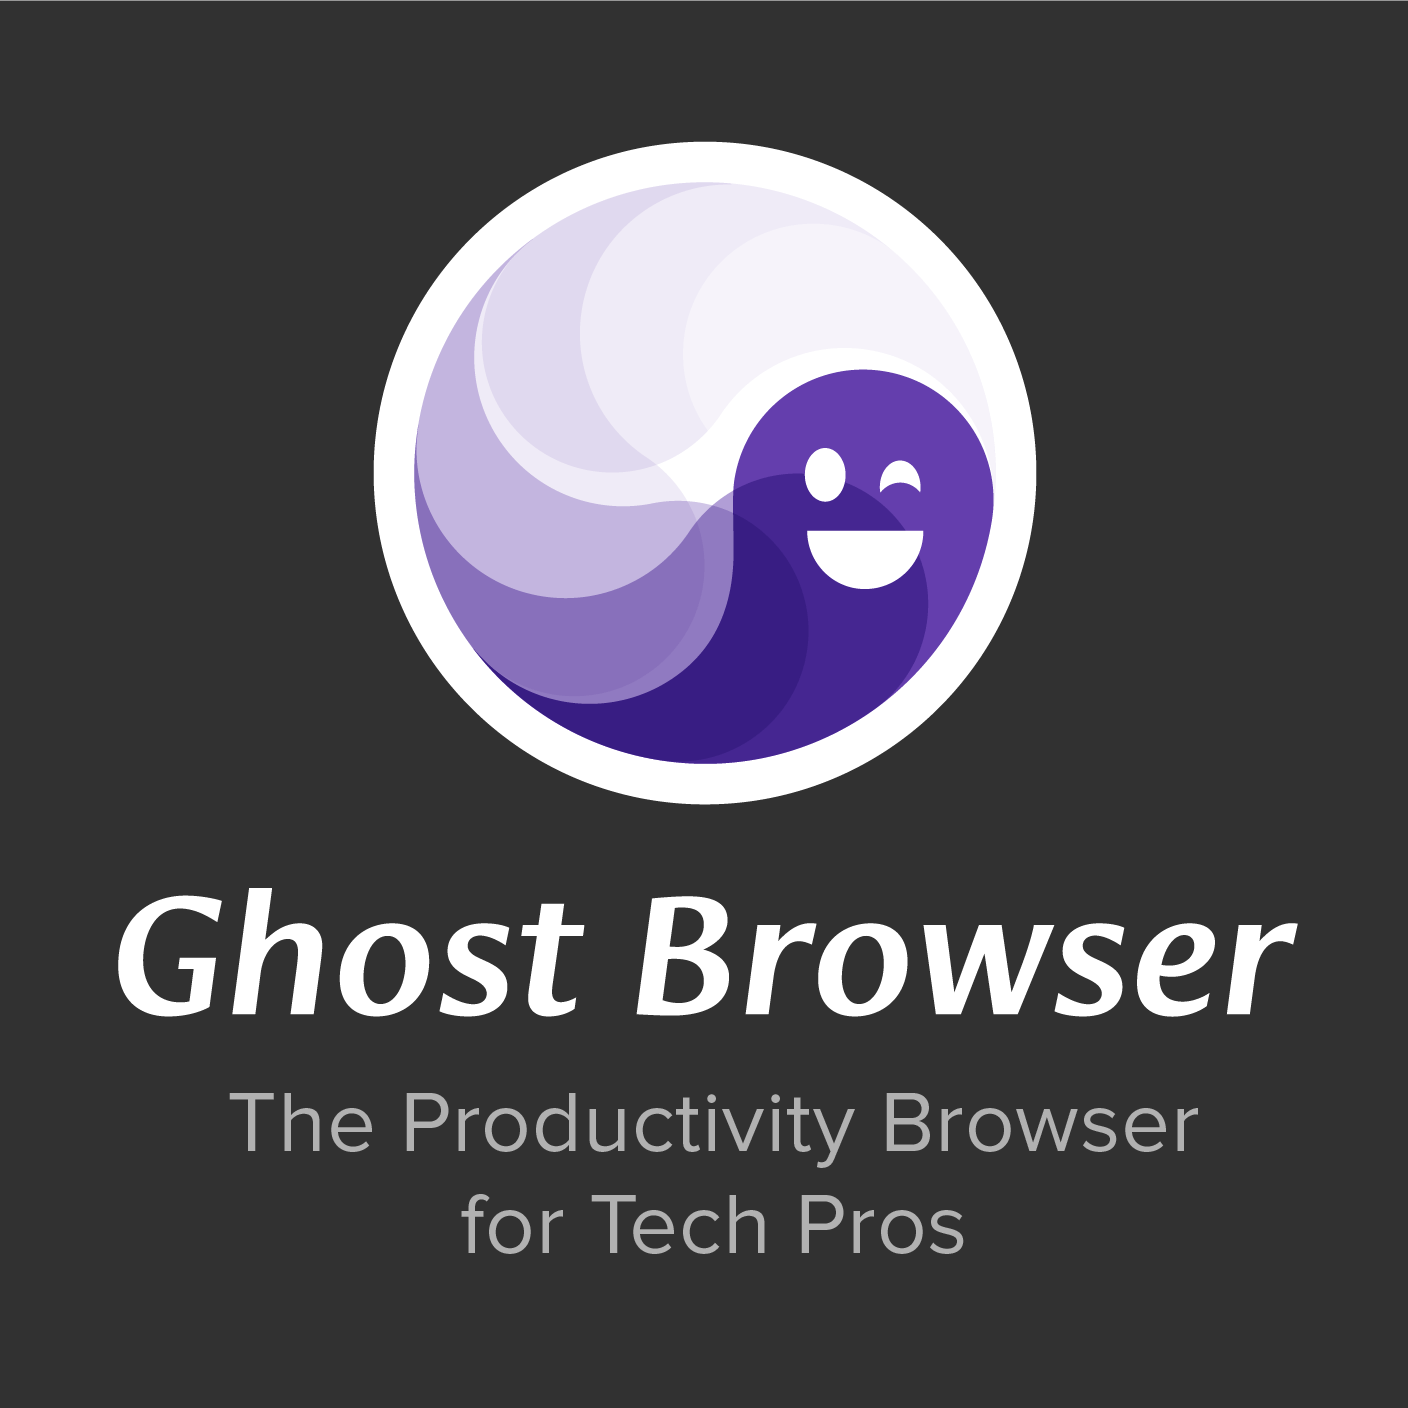 ghost browser logo